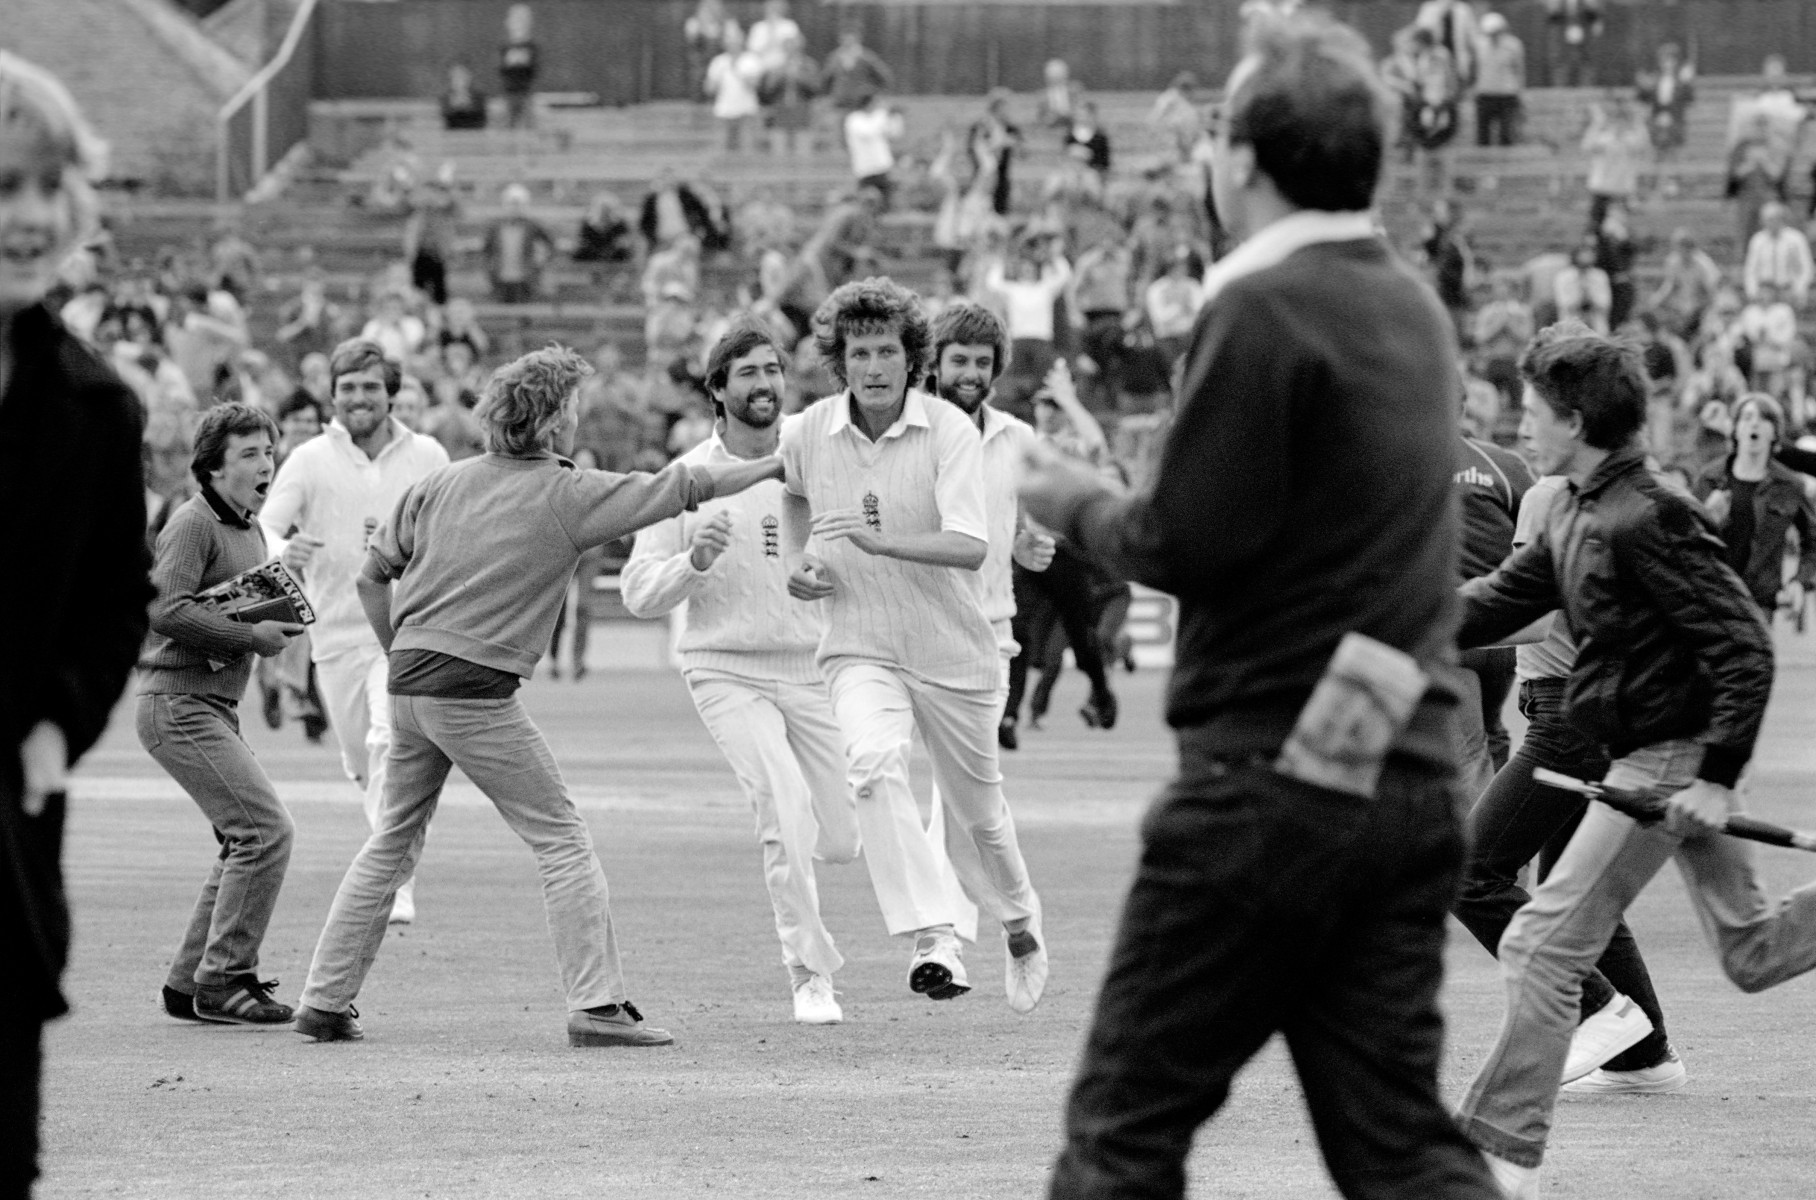 , Bob Willis was a cricketing colossus, packed a punch as a pundit and was an England national hero